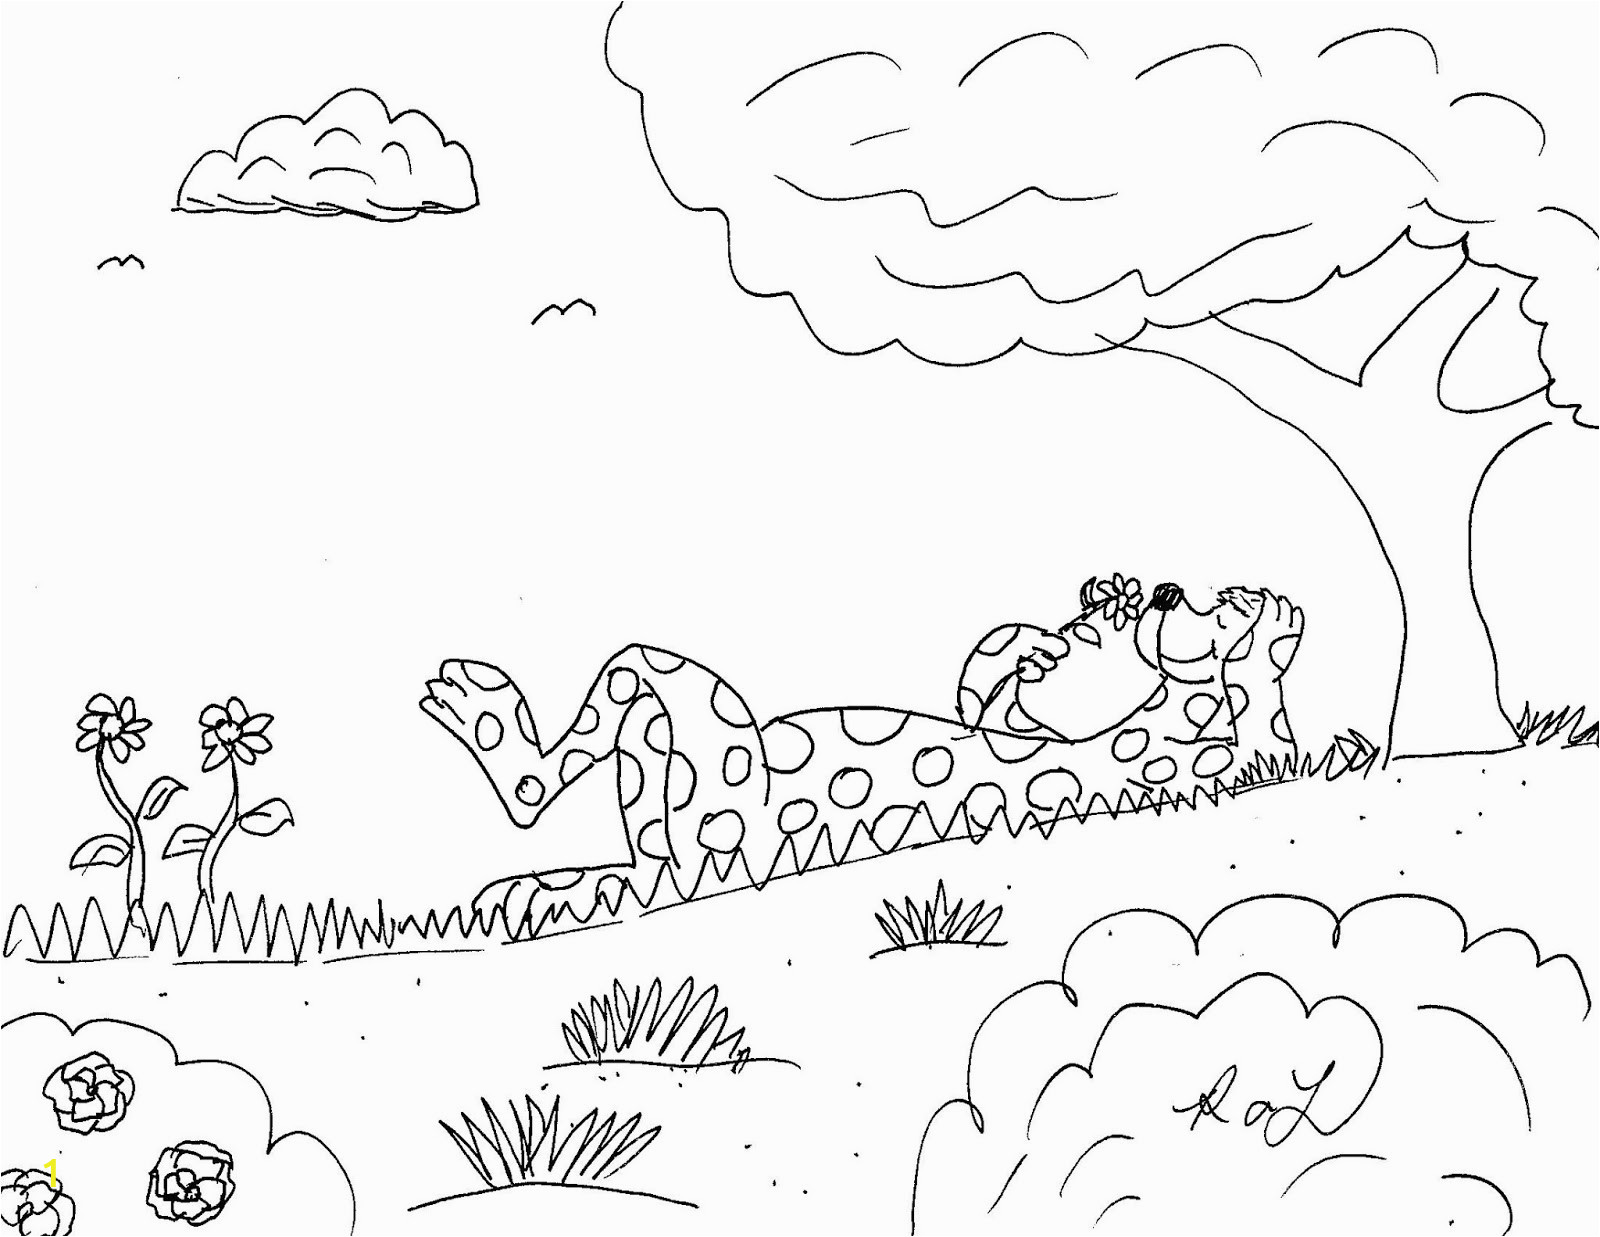 Put Me In the Zoo Coloring Page Robin S Great Coloring Pages Put Me In the Zoo Book